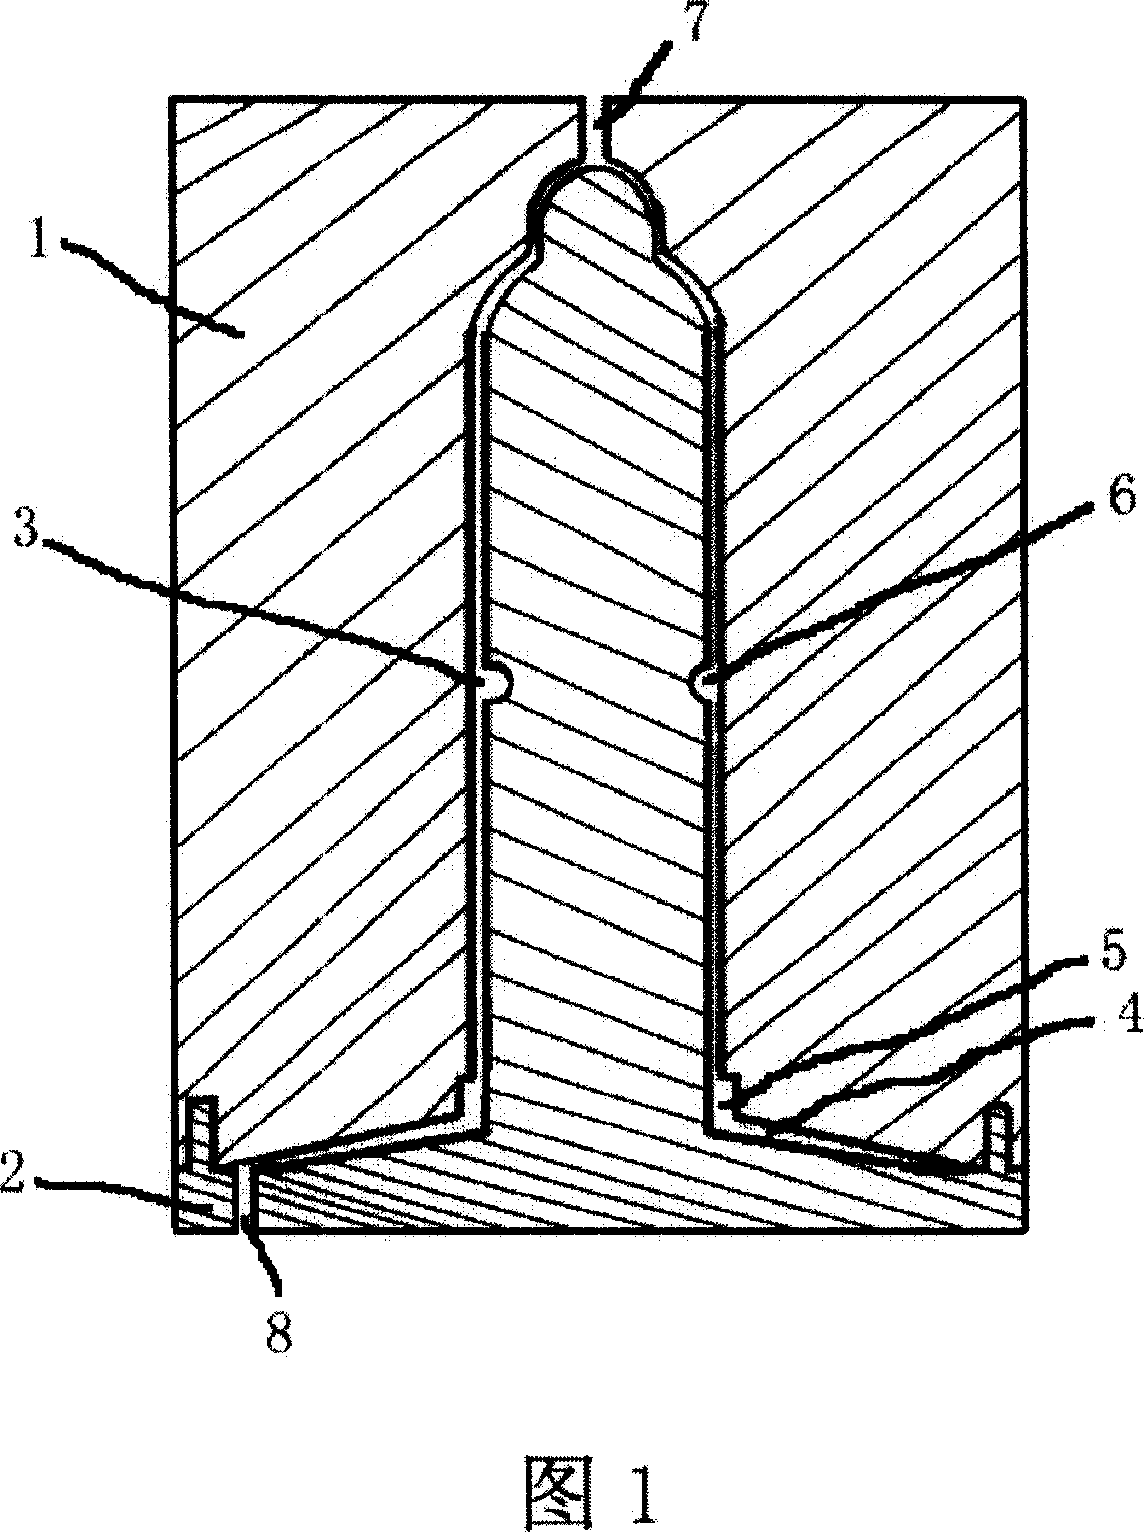 Method for manufacturing male condom with self-erecting skirt-shape structure and product